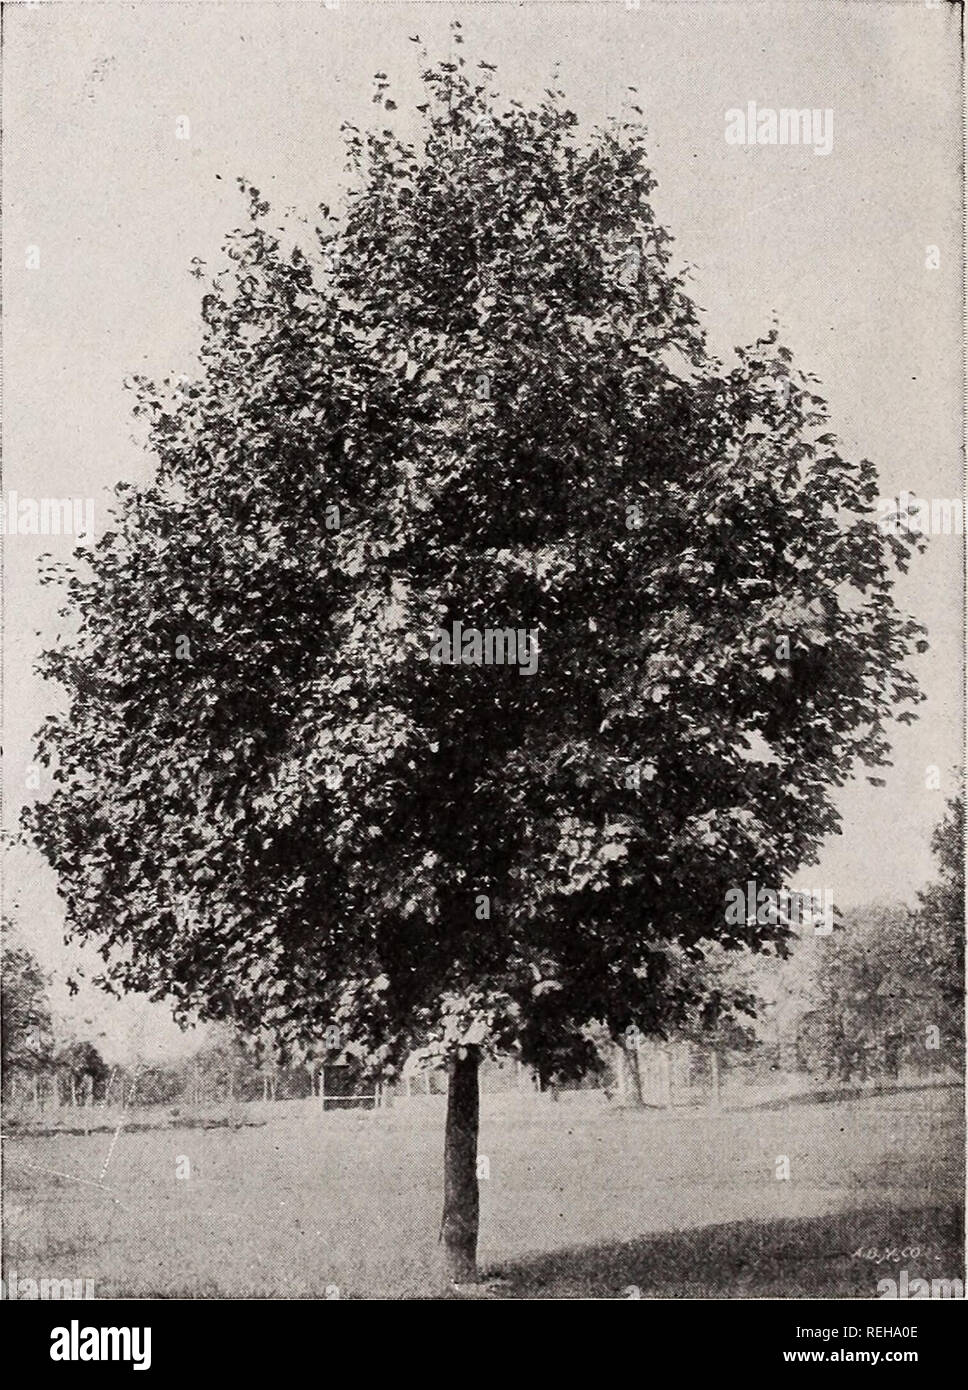 . C. M. Hobbs &amp; Sons. Nurseries Horticulture Catalogs; Evergreens Catalogs; Fruit trees Catalogs; Climbing plants Catalogs; Shrubs Catalogs; Flowers Catalogs; Vegetables Catalogs. Acer platanoides—Norway Maple. Acer Wieri laciniatum Wier's Cut-Leaved Weeping Maple. Deciduous Trees Acer - The Maples Ailanthus Acer dasycarpum (White or Silver Maple). A rapid growing tree of large size. Adapts it- self to a variety of soils, with the exception of dry ground. var. dasycarpum Wieri laciniatum (Wier's Cut-leaved Weeping Maple). Graceful droop- ing branches. Especially attractive as a tall- growi Stock Photo